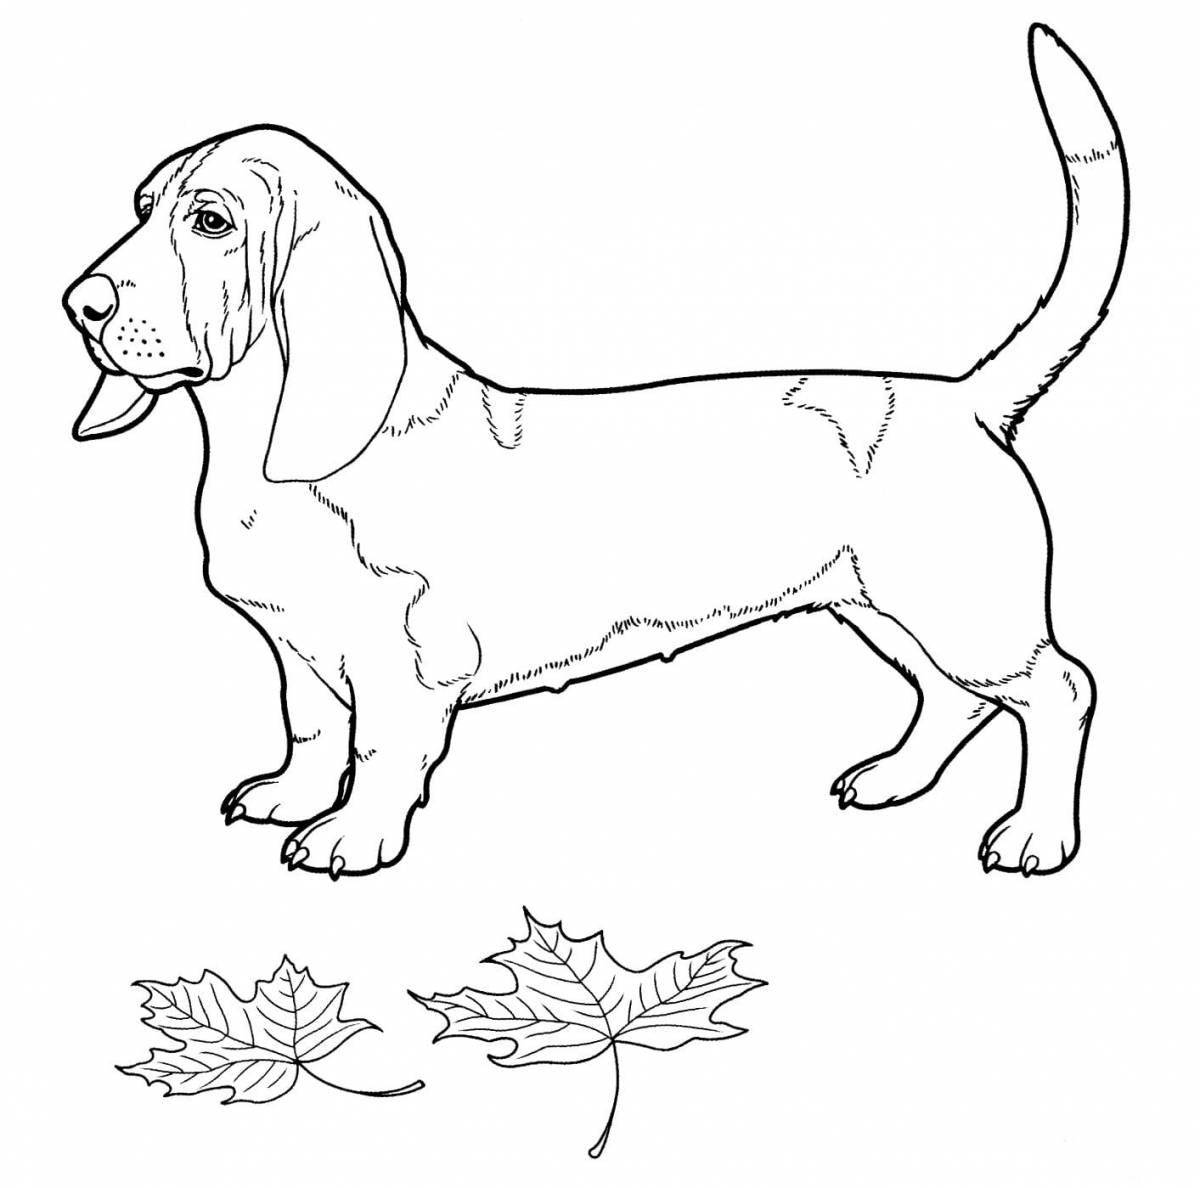 Loyal coloring pages of dogs of different breeds